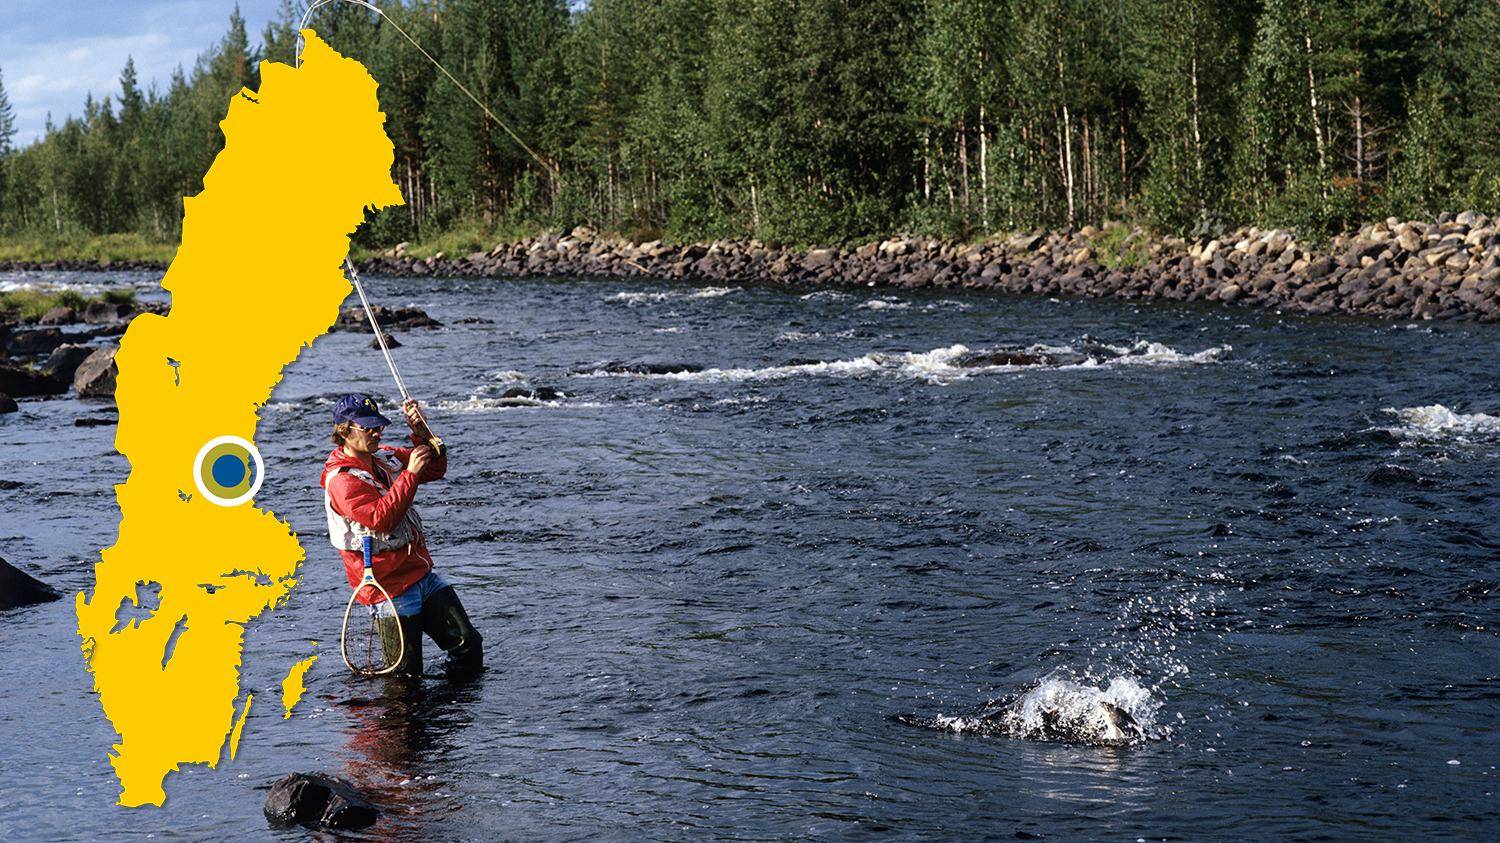 A man is standing in a river fly fishing. He has just caught a fish and is trying to reel it in. There is a yellow map of Sweden with a blue dot that marks the location of Voxnan.